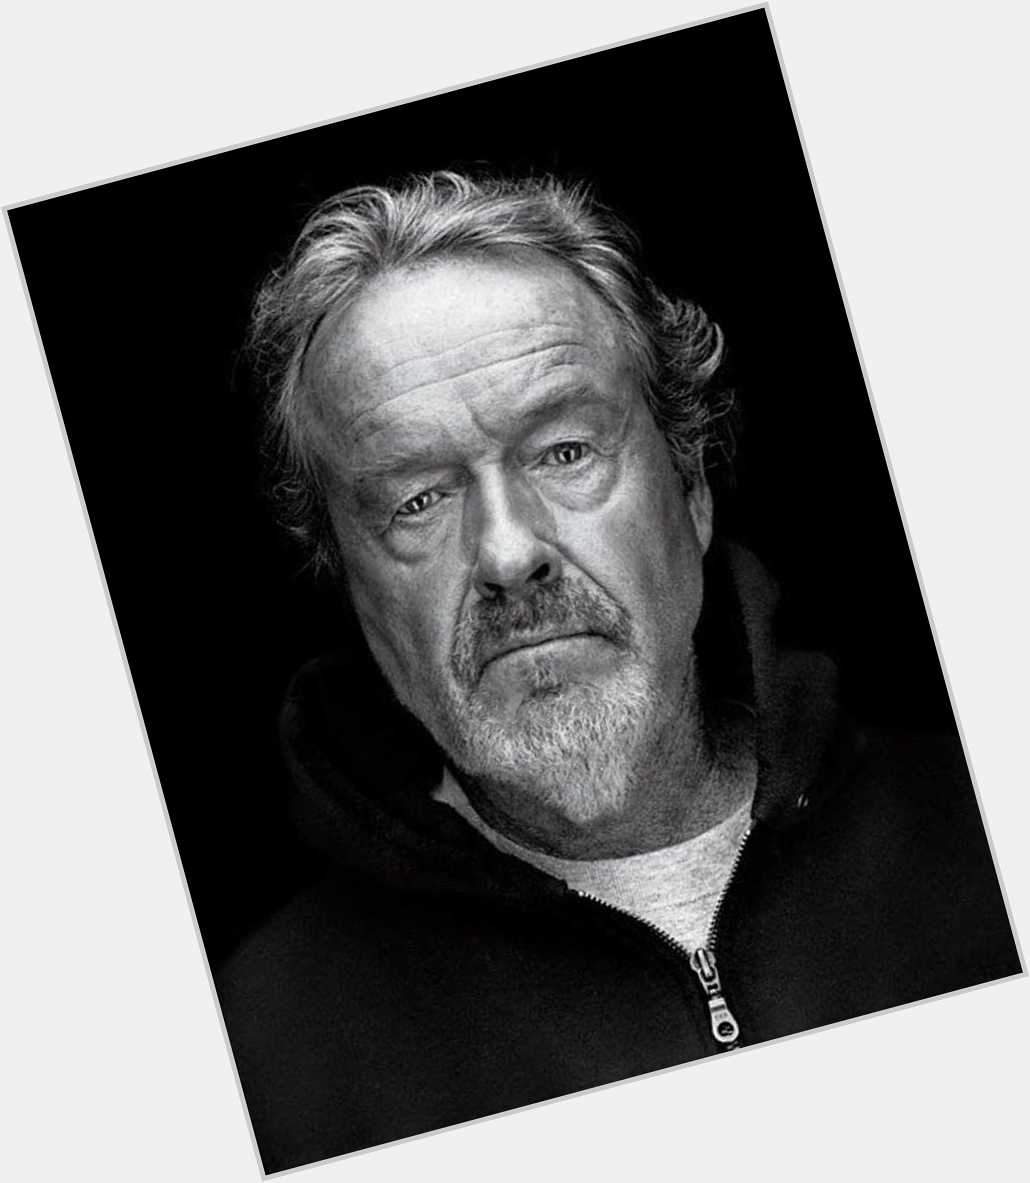 Join us in wishing Sir Ridley Scott a very Happy Birthday today! 